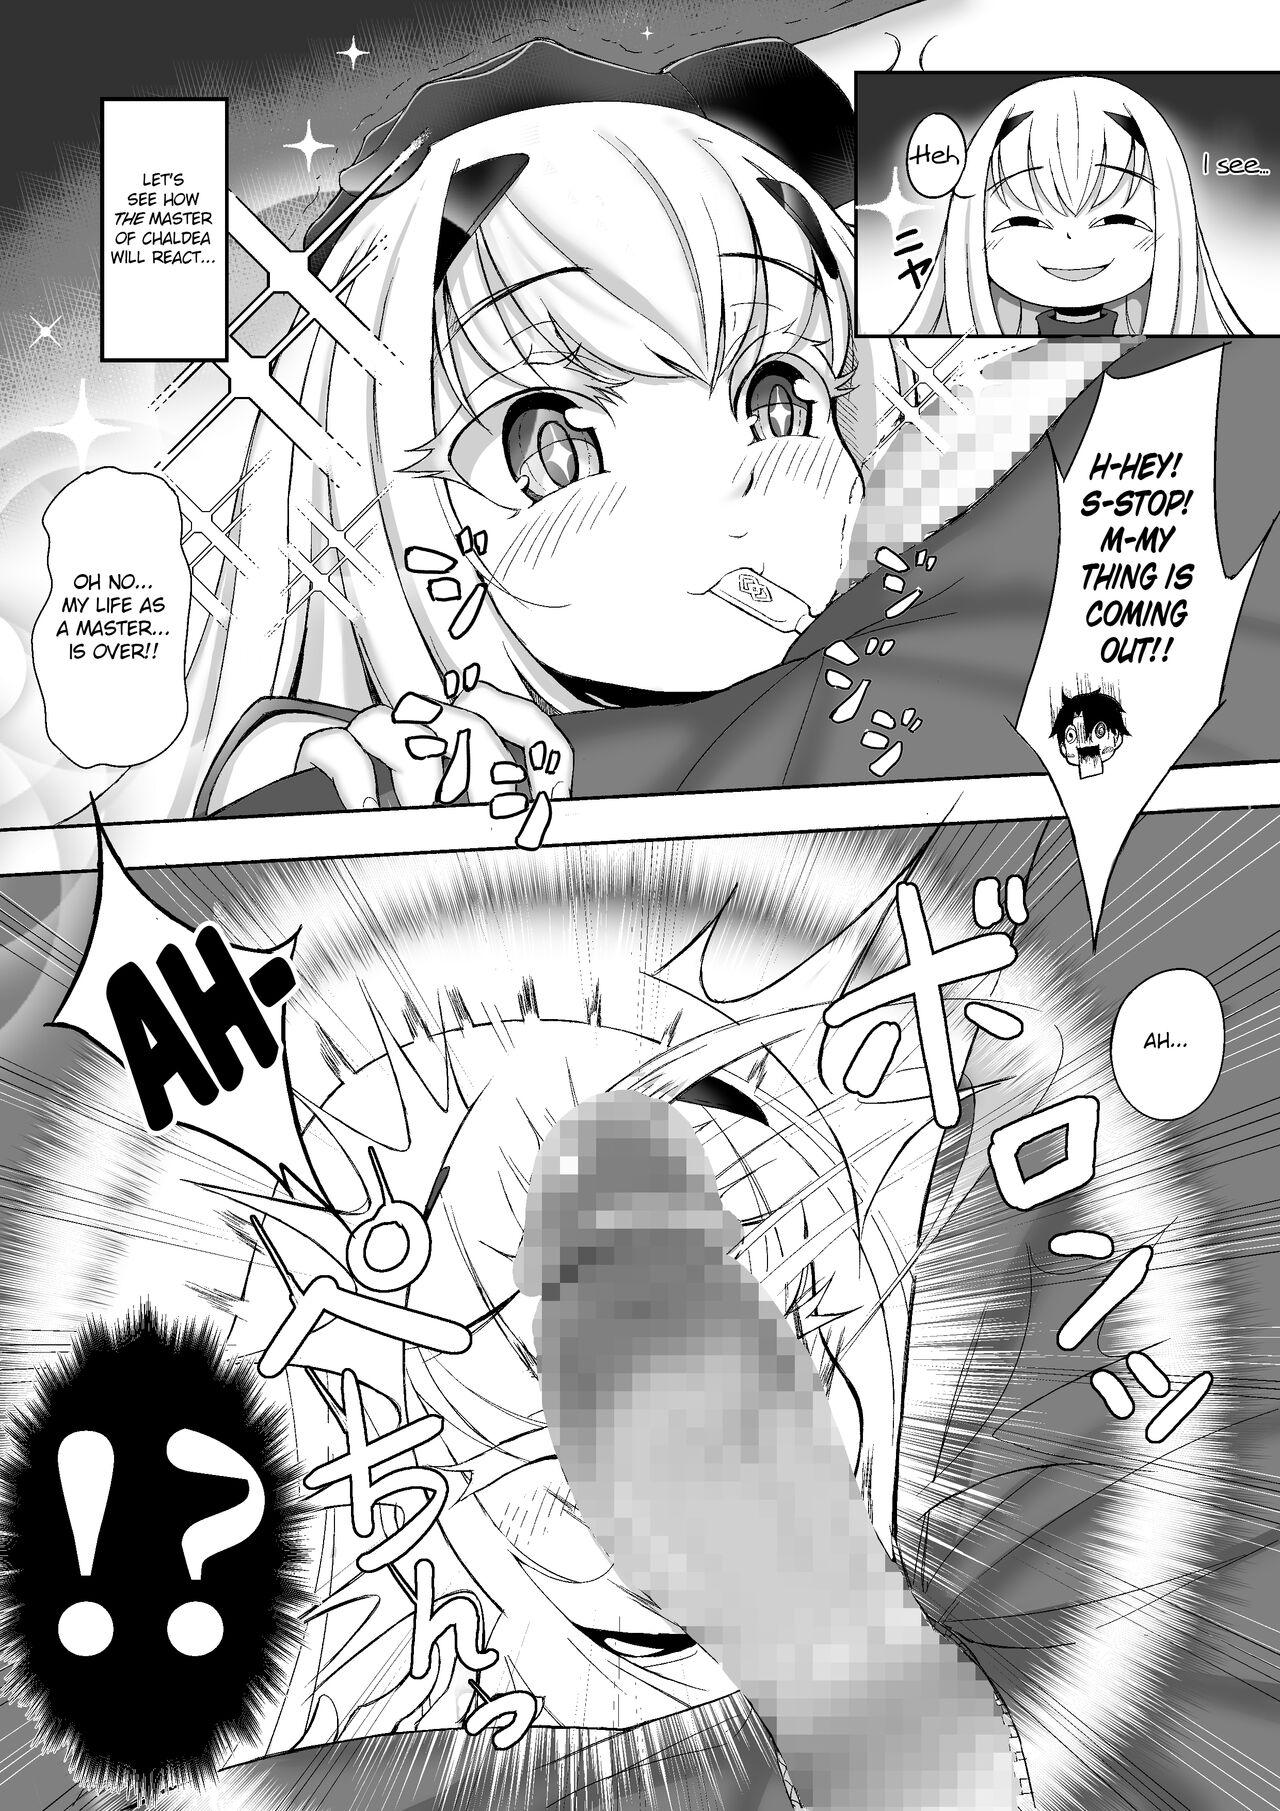 Orgasms FujiMelu Maryoku Kyoukyuu Love One Another - Fate grand order Asiansex - Page 7